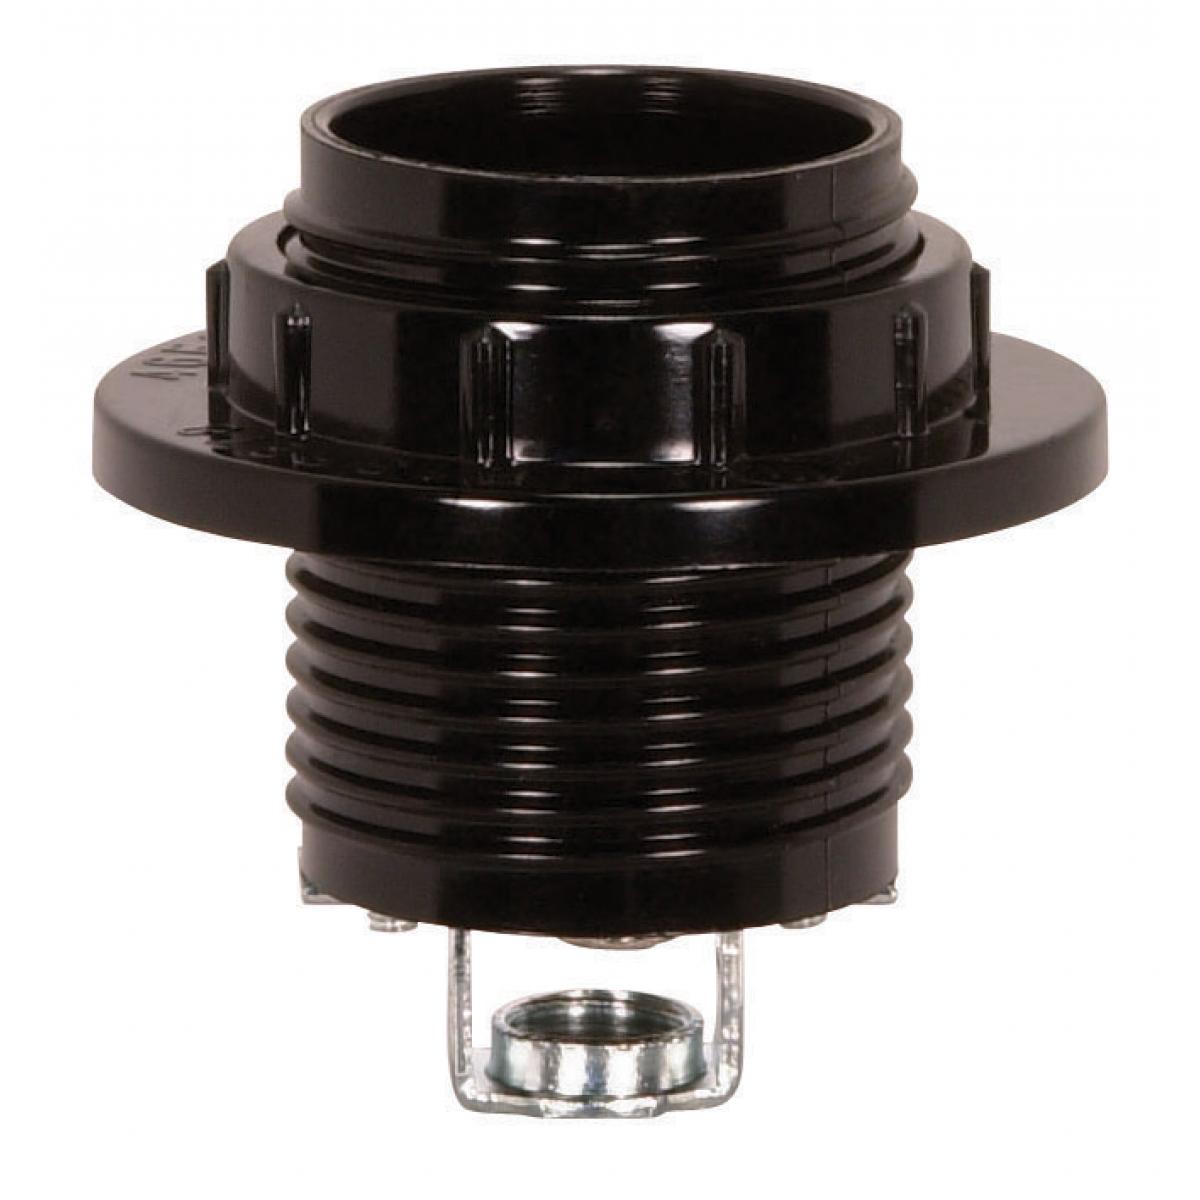 Satco 80-1077 Threaded Socket With Ring 1/8 IP Hickey Screw Terminals 2" Overall Height 1-1/4" Diameter 2-1/8" Outside Ring 660W 250V